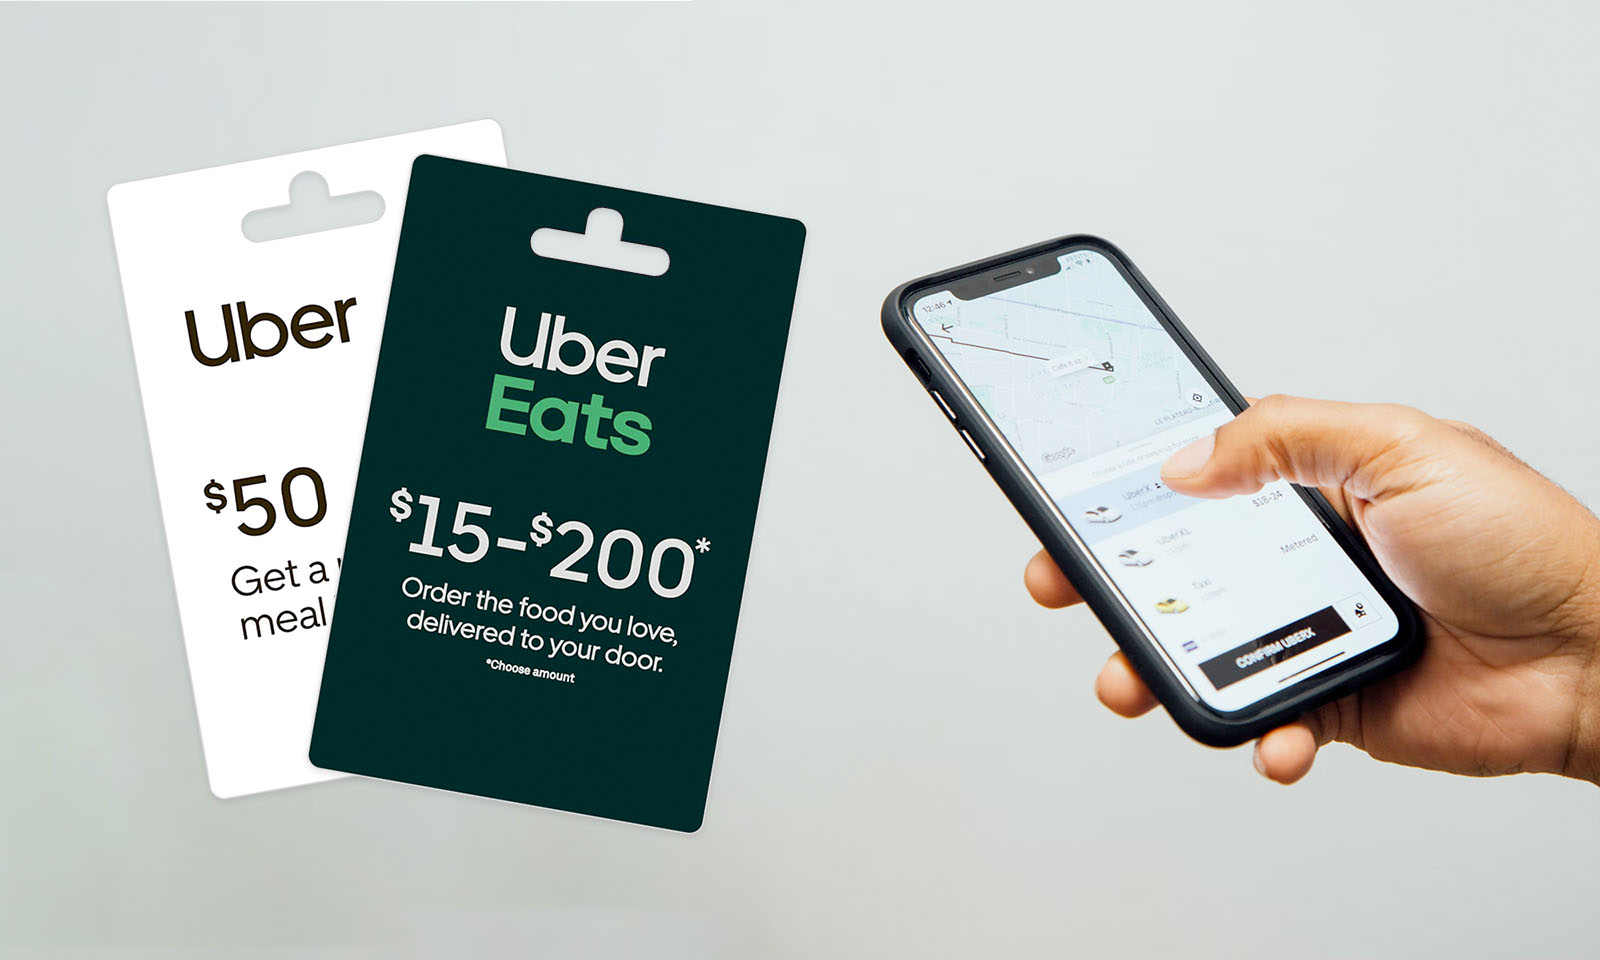 My 3 $25 UBER GIFT CARD WINS I WON FROM 3 DIFFERENT SWEEPSTAKES! IM GONNA  EAT THE $75 DOLLARS INSTEAD OF RIDING IN A STRANGER'S CAR...I… | Instagram